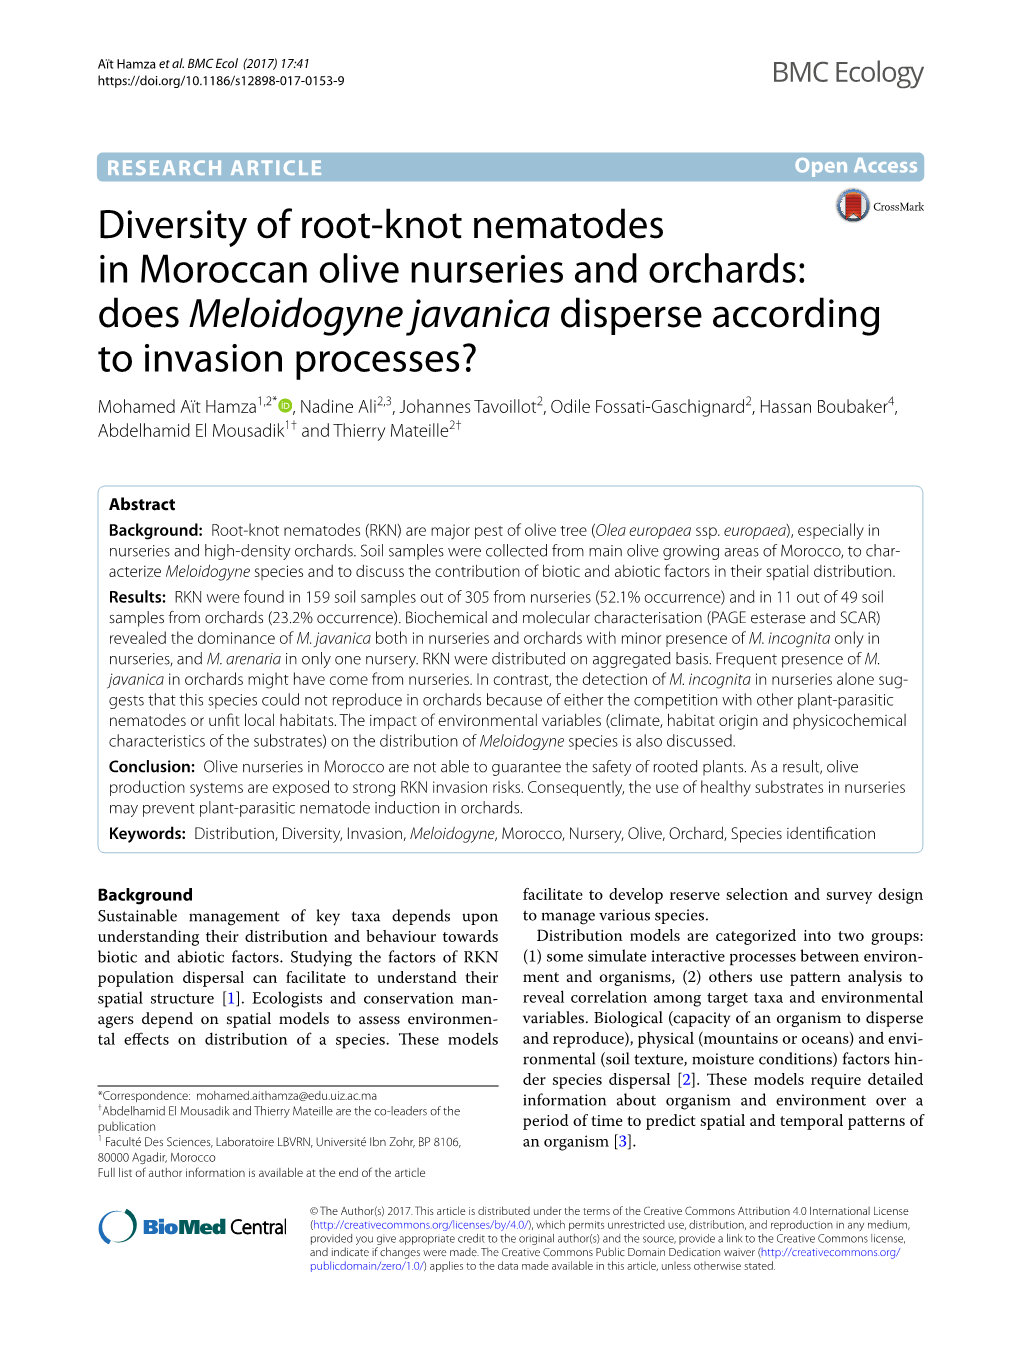 Diversity of Root-Knot Nematodes in Moroccan Olive Nurseries And